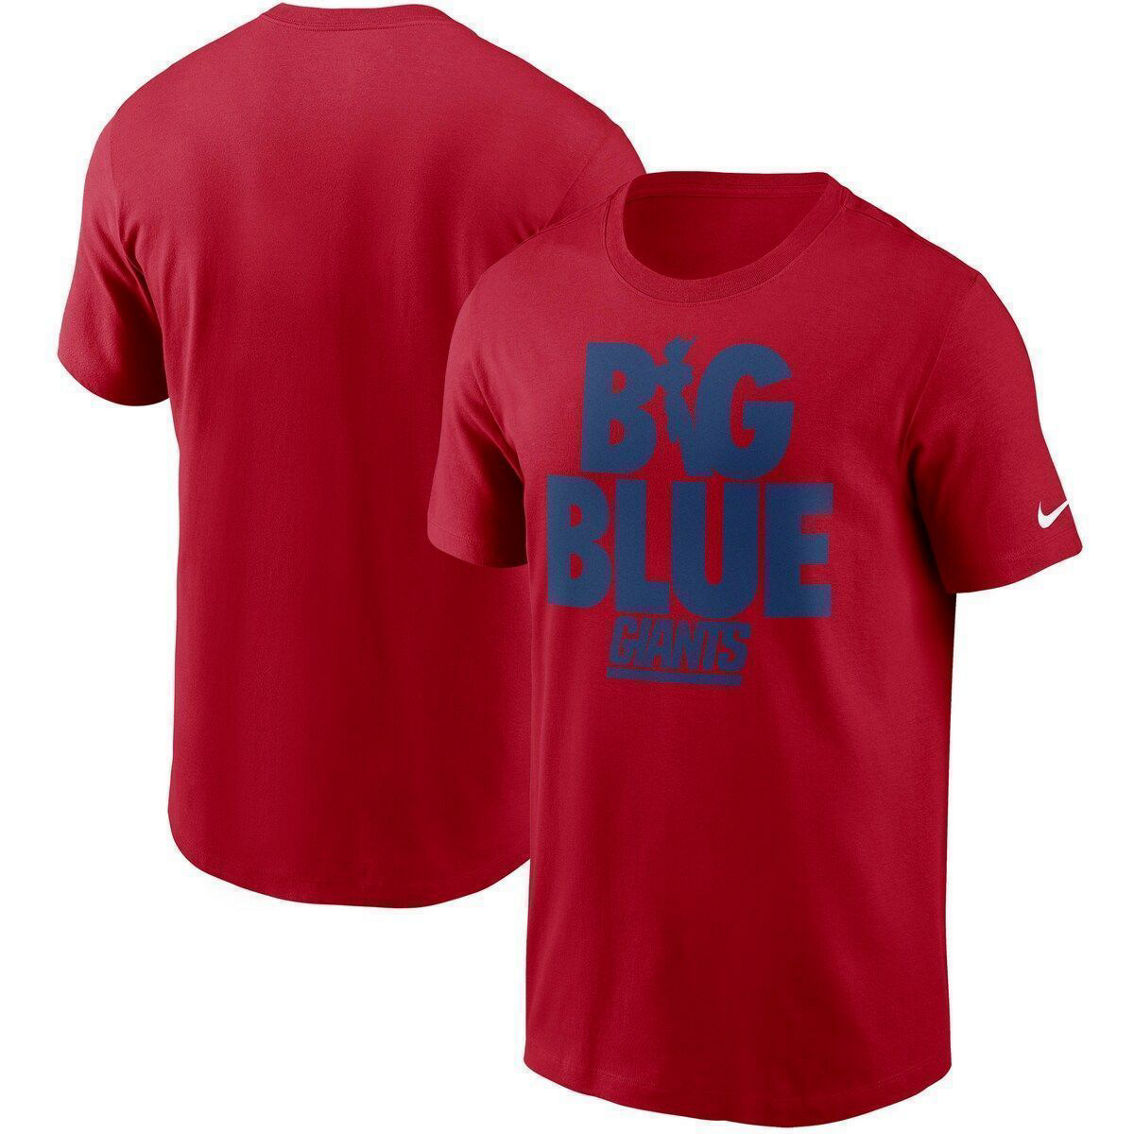 Nike Men's Red New York Giants Hometown Collection Big Blue T-Shirt - Image 2 of 4